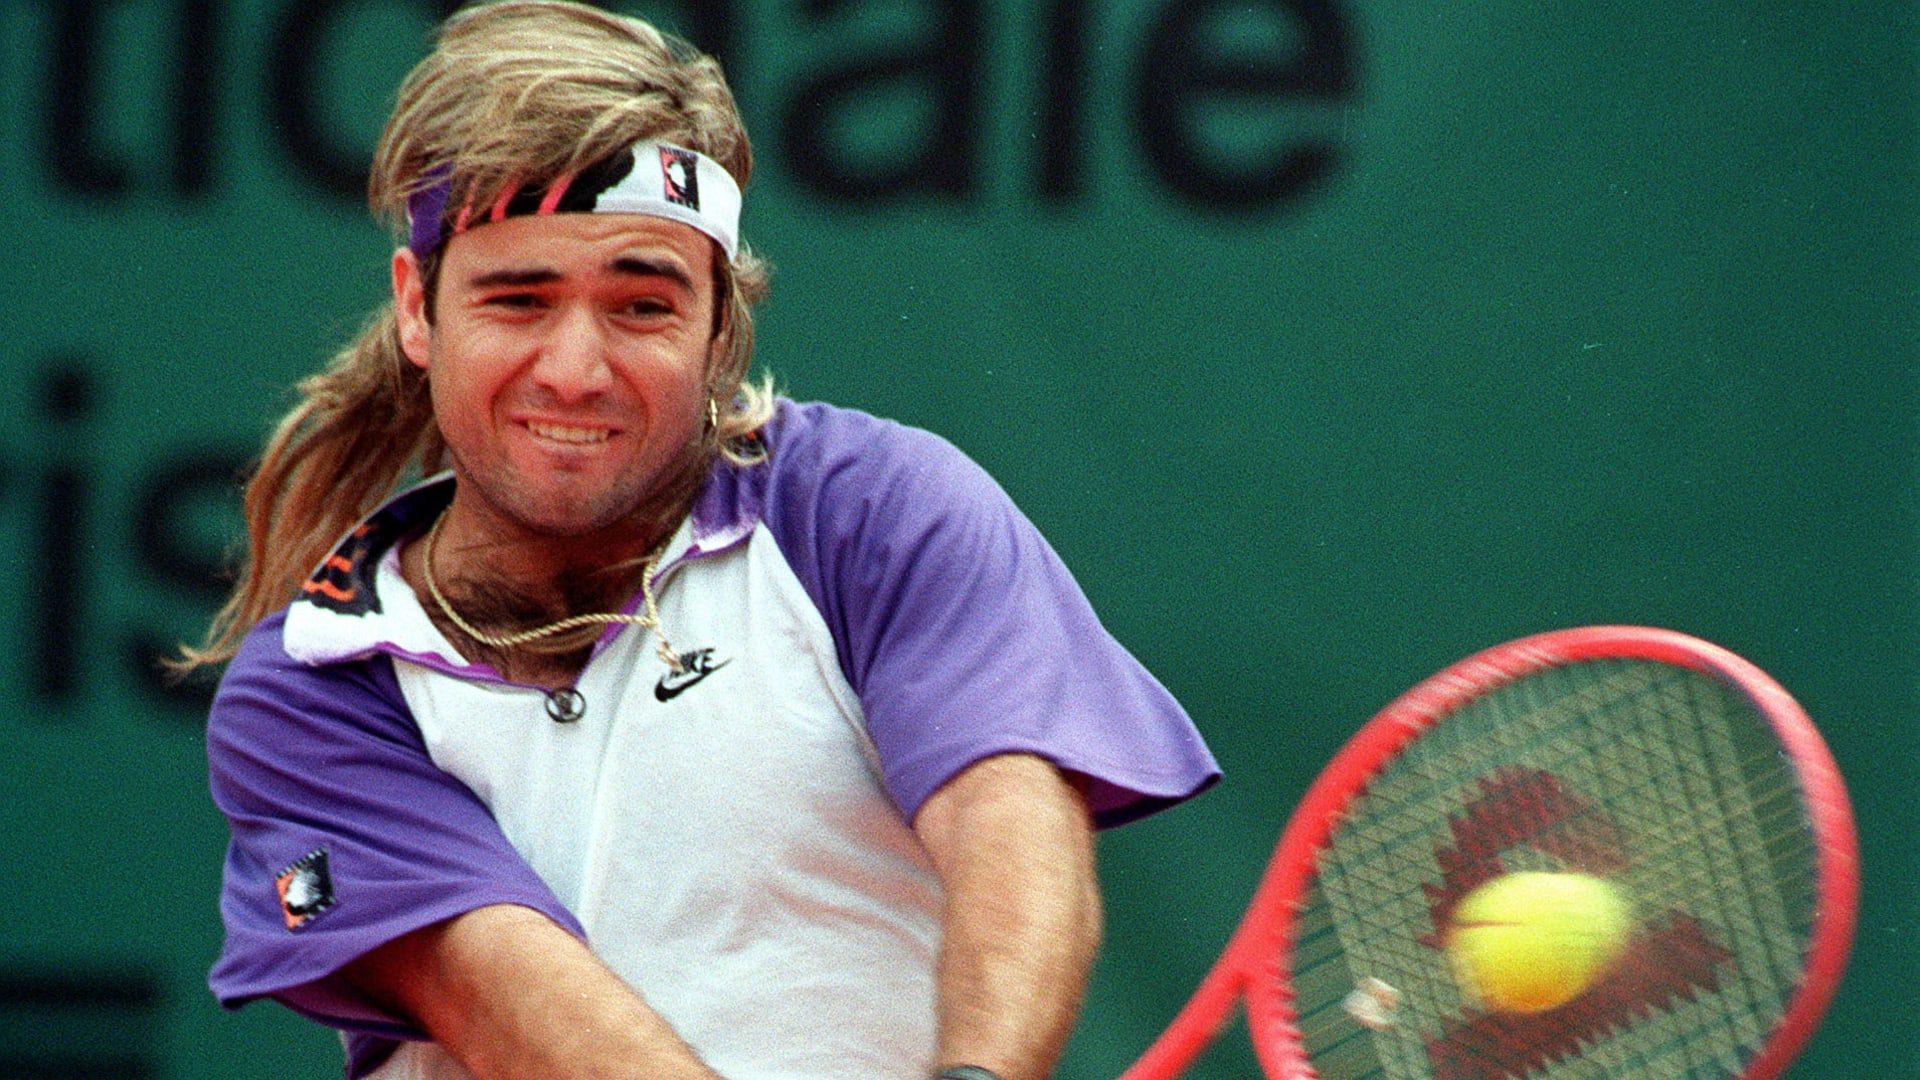 Rewatch, French Open 1990: Agassi almost flips wig in first Slam final.